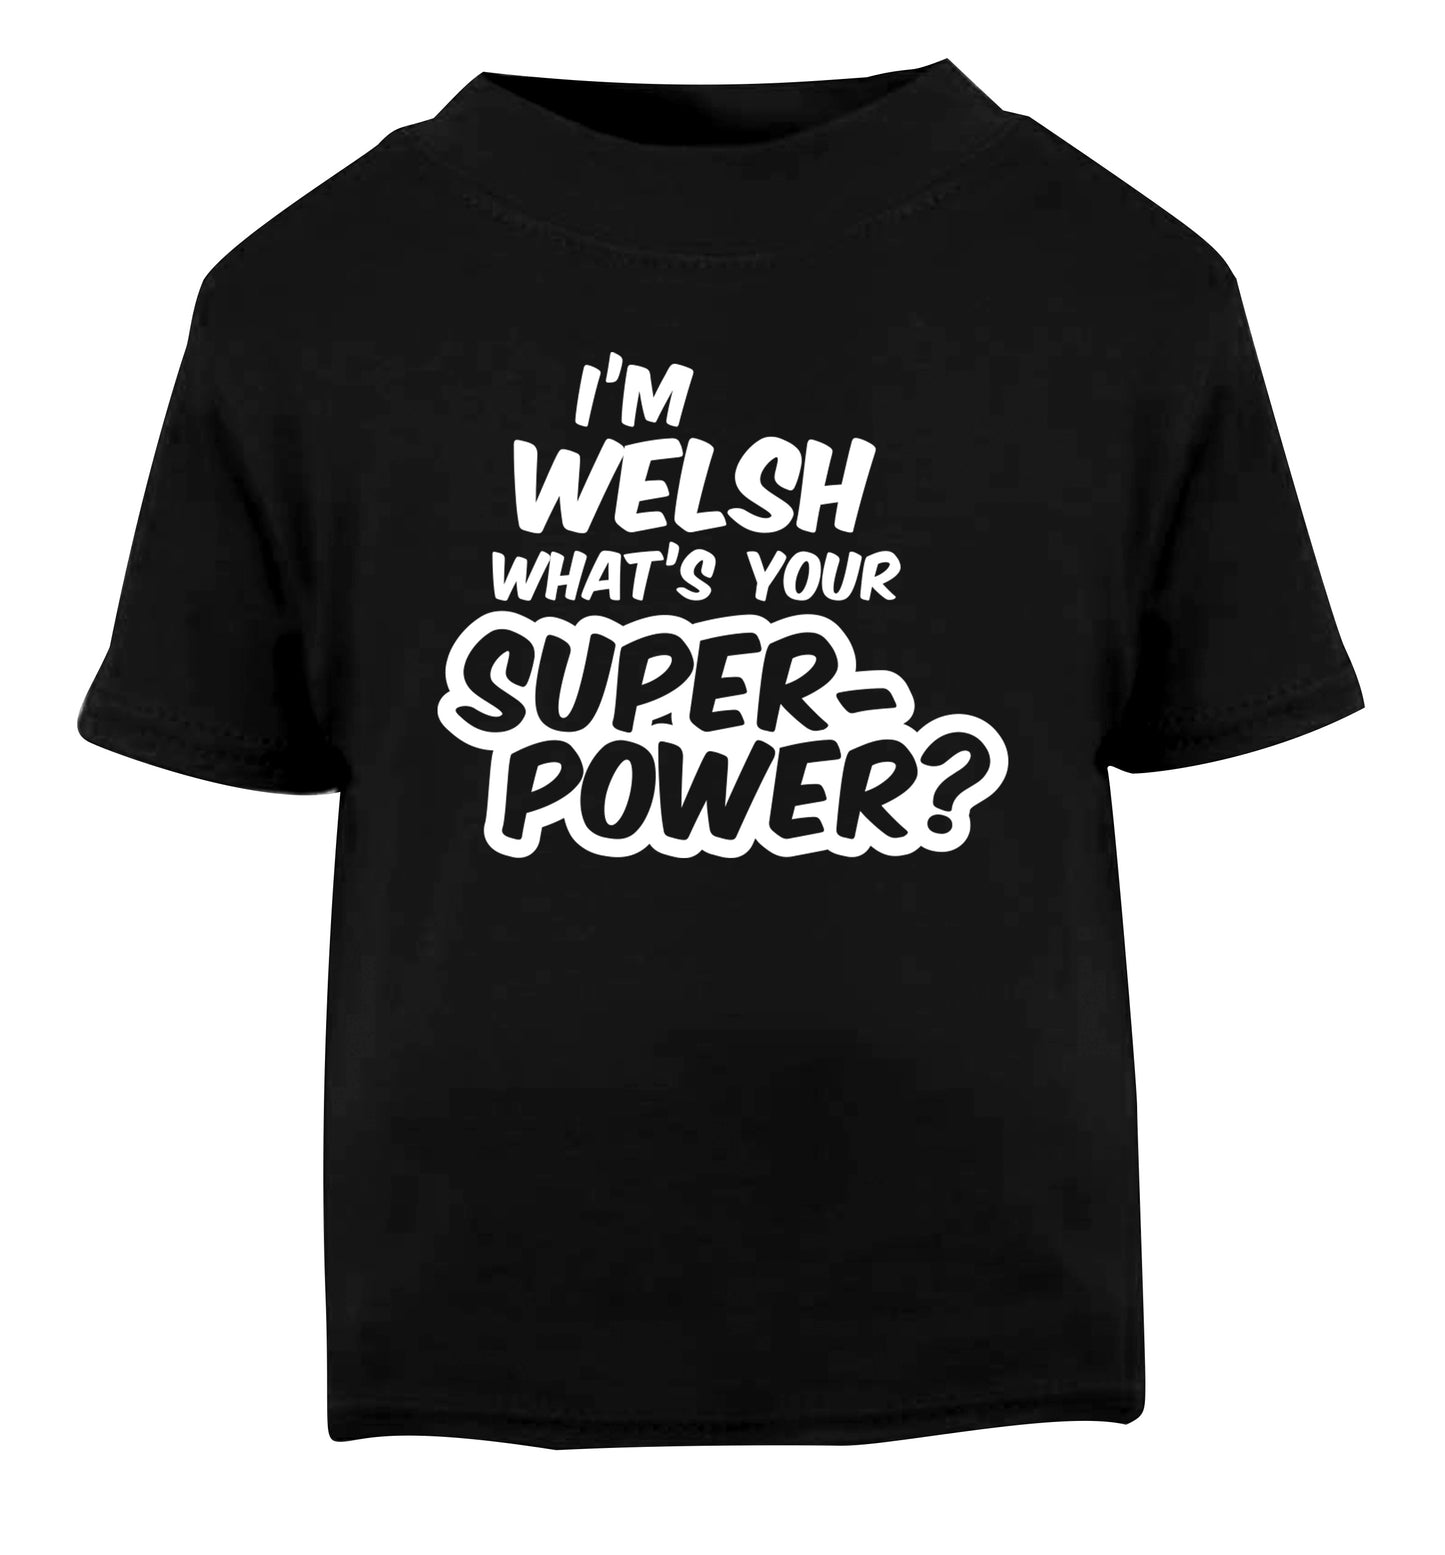 I'm Welsh what's your superpower? Black Baby Toddler Tshirt 2 years